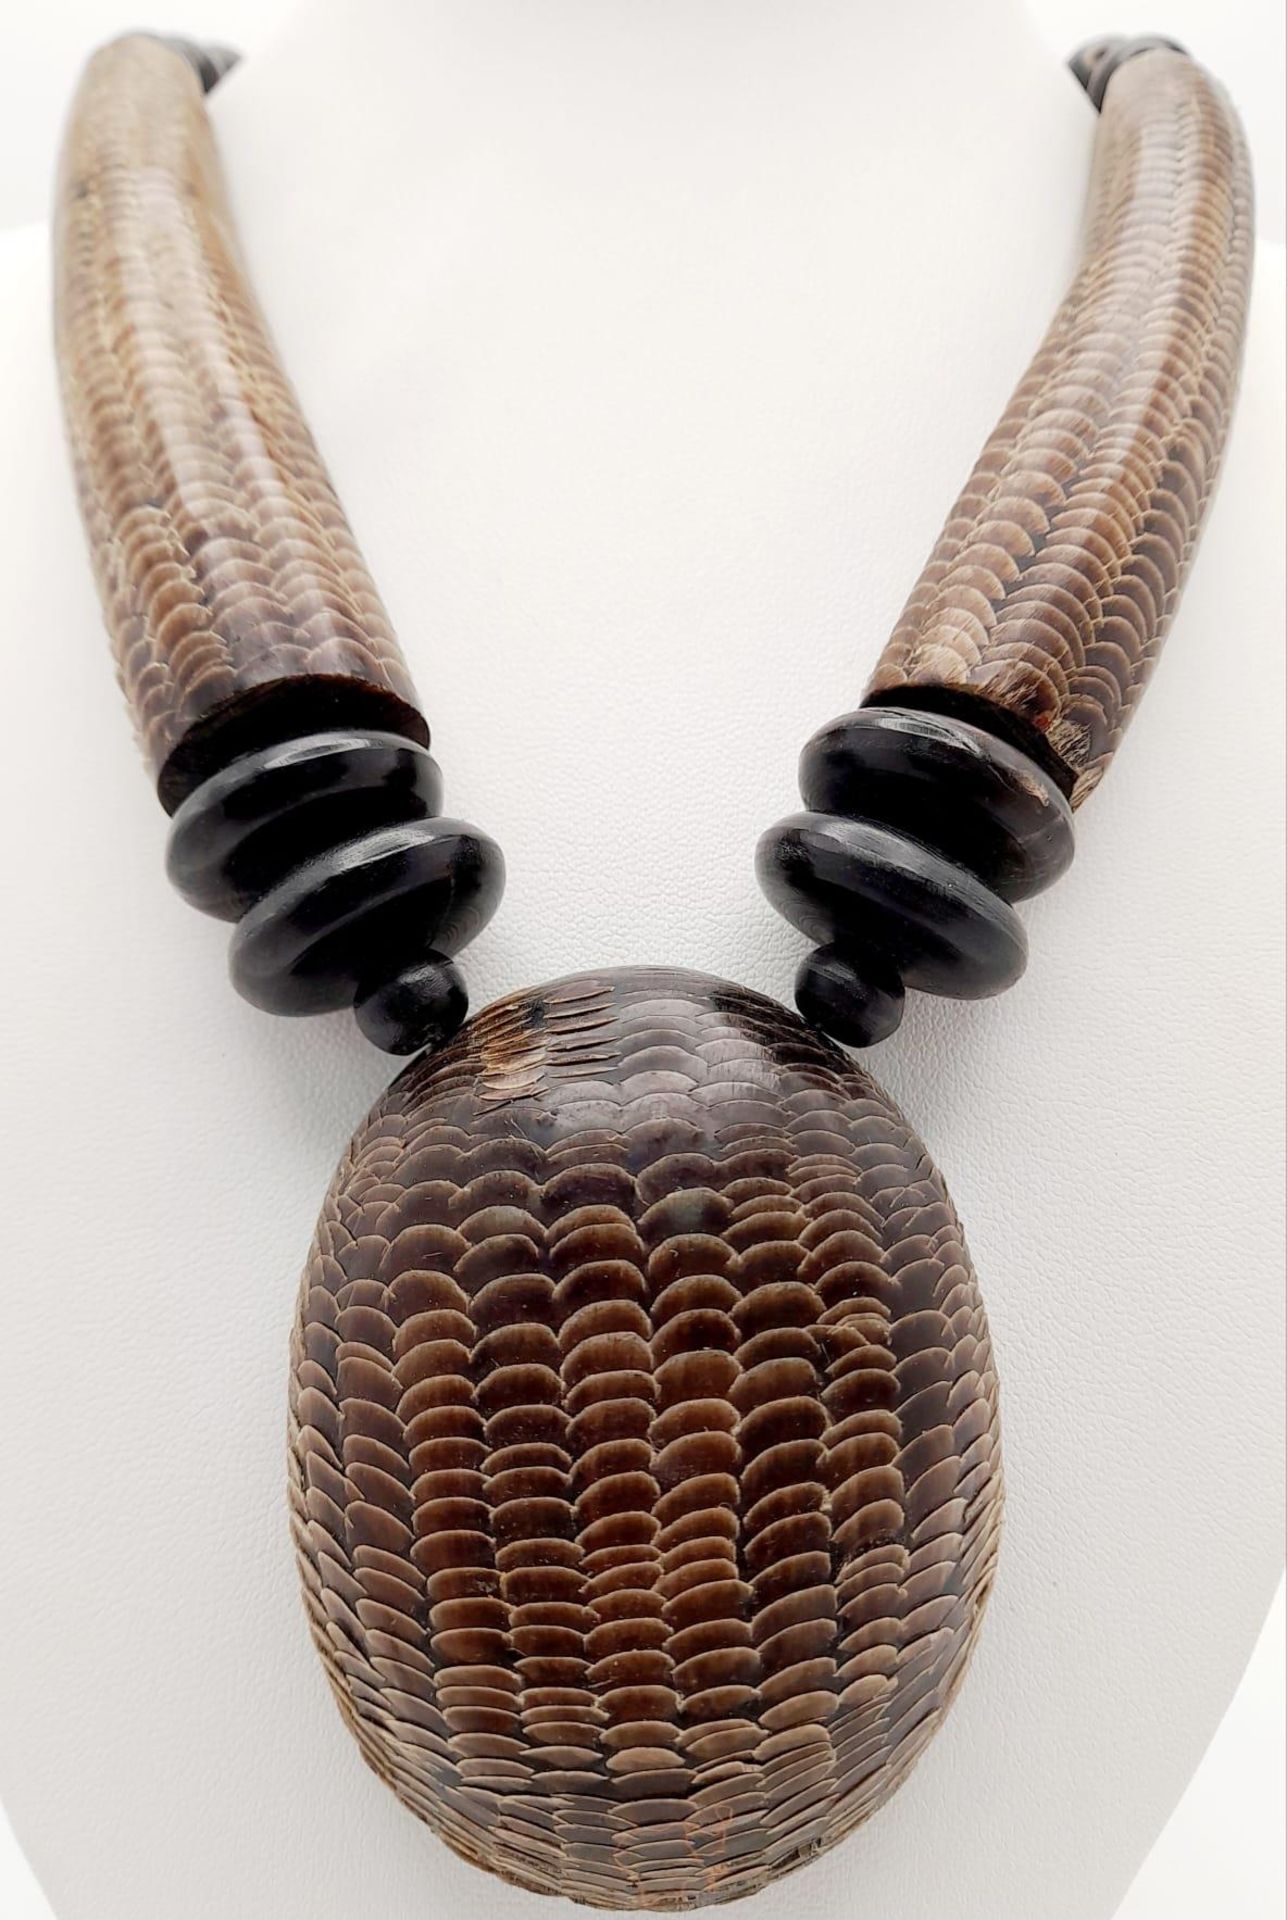 An East African talisman’s necklace, made with snakeskin and other materials, used by voodoo doctors